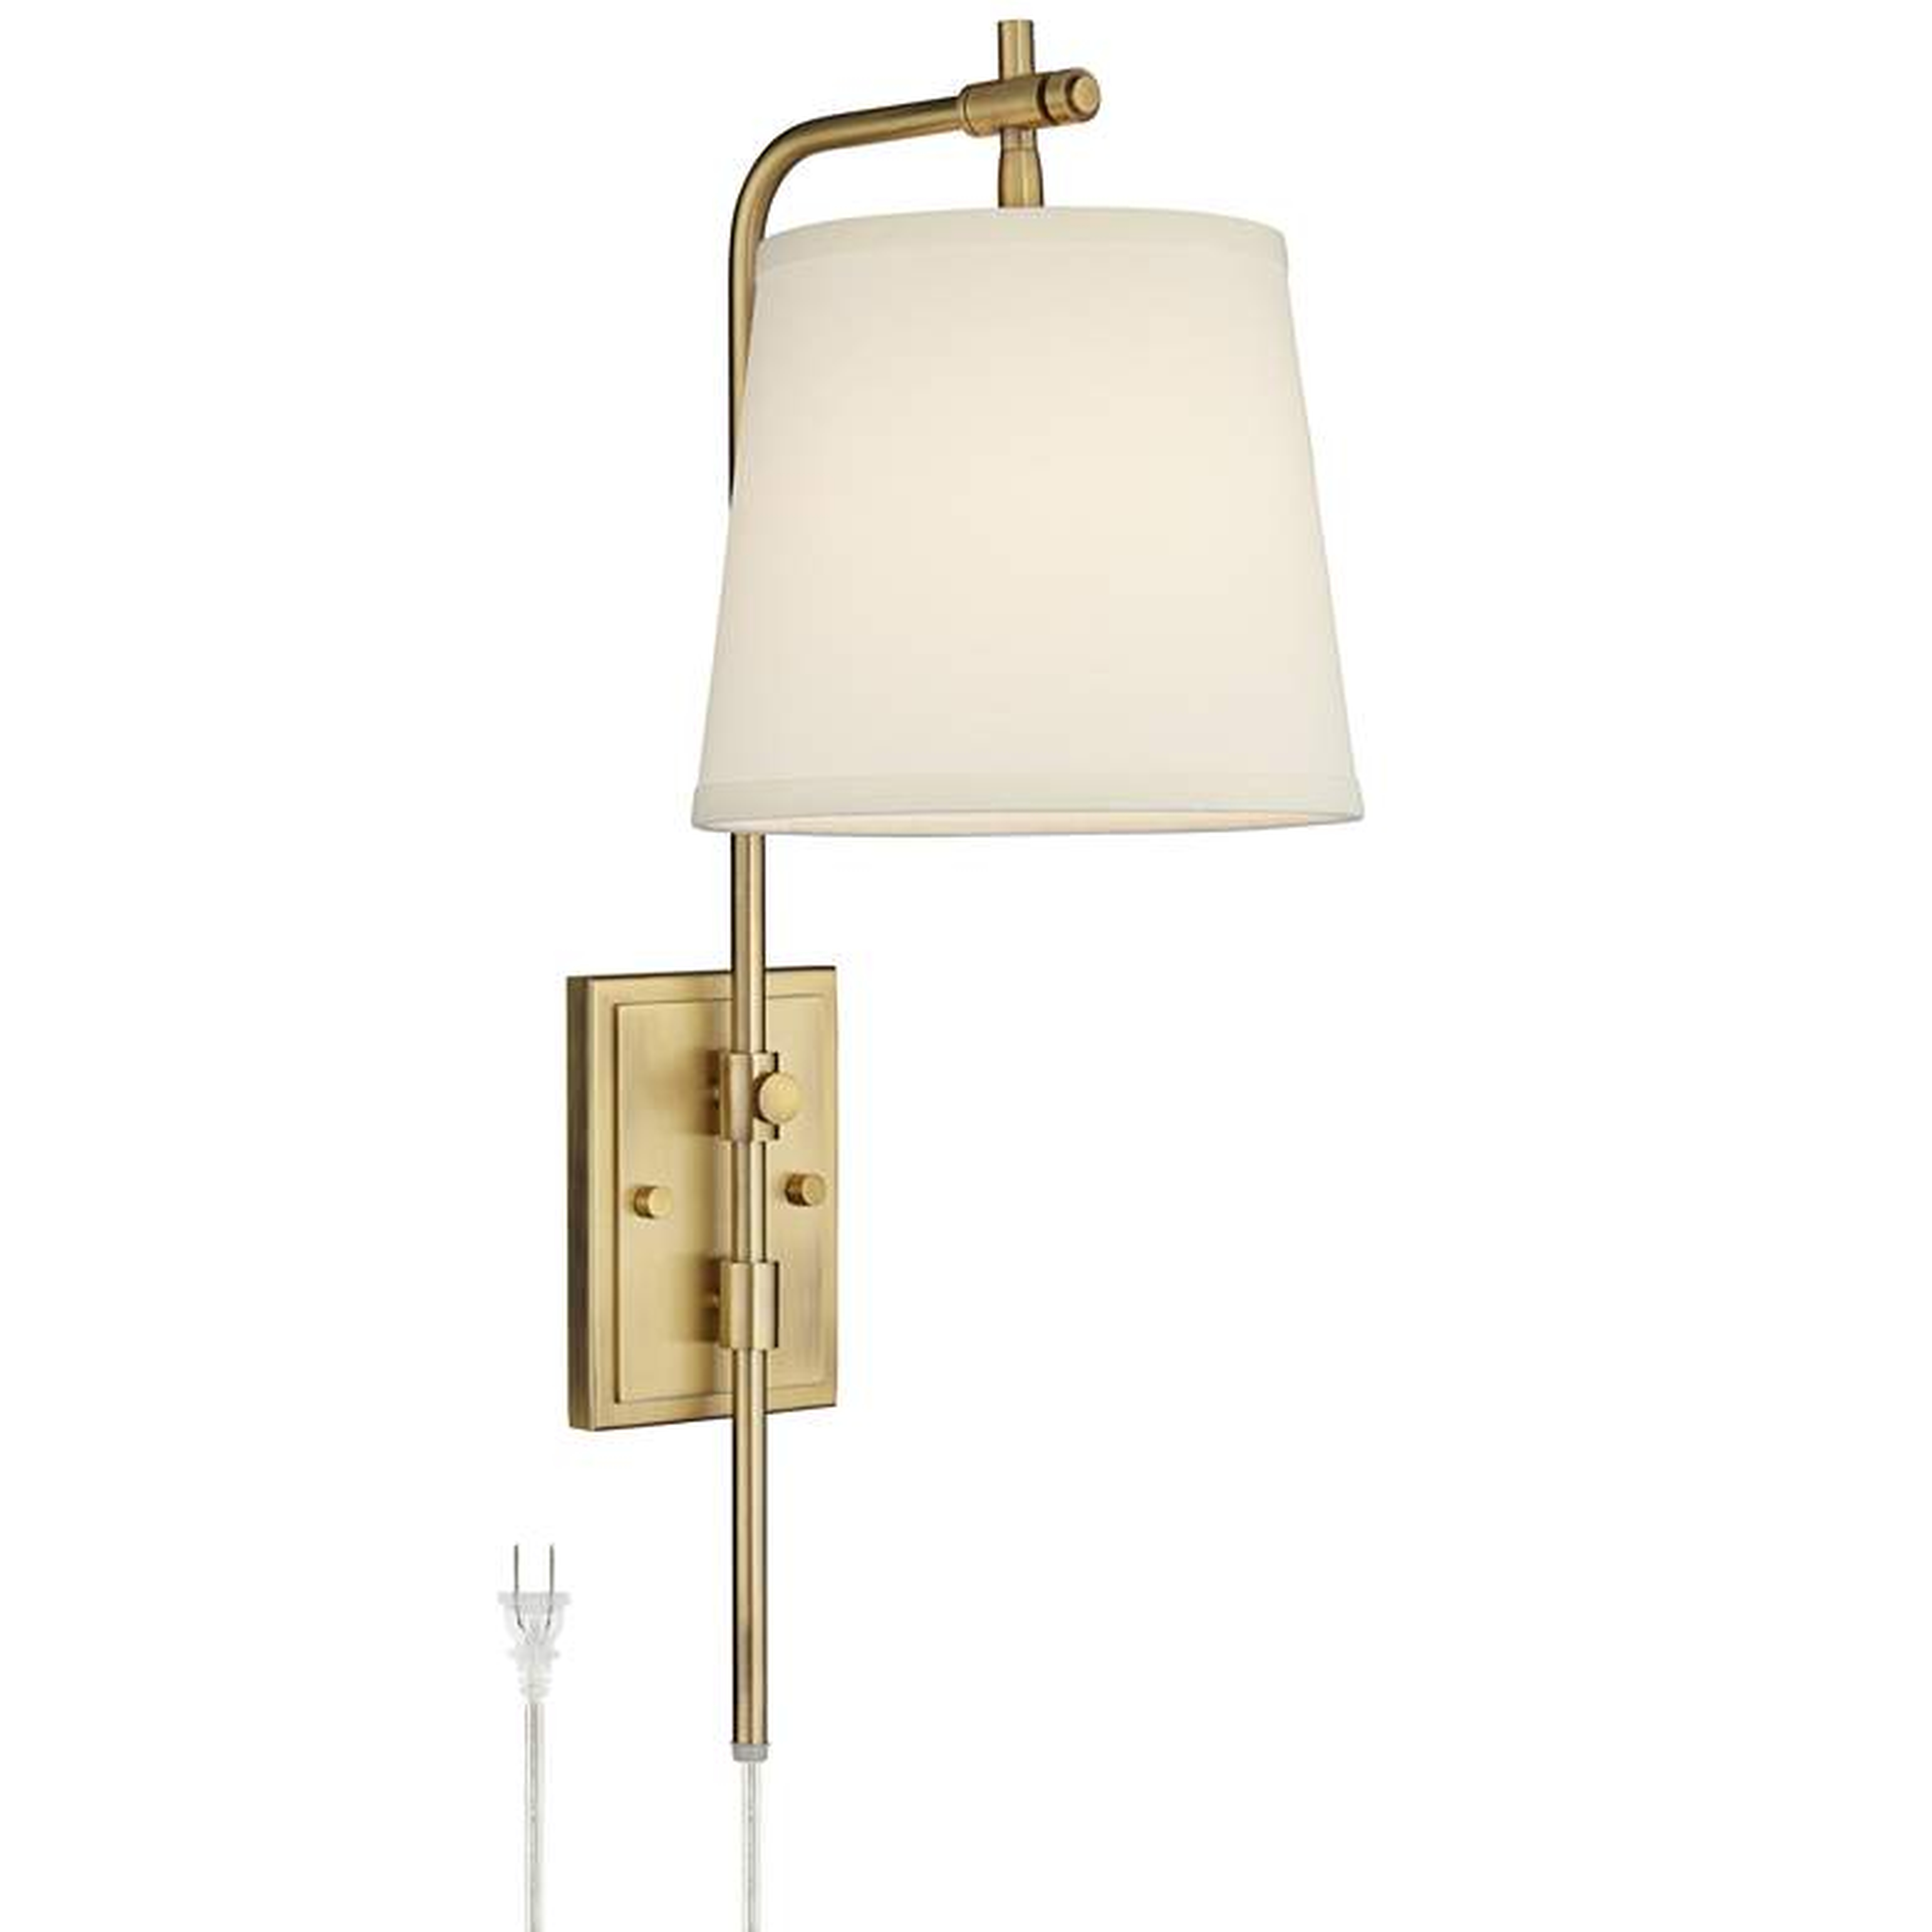 Seline Warm Gold Adjustable Plug-In Wall Lamp - Style # 71H55 - Lamps Plus